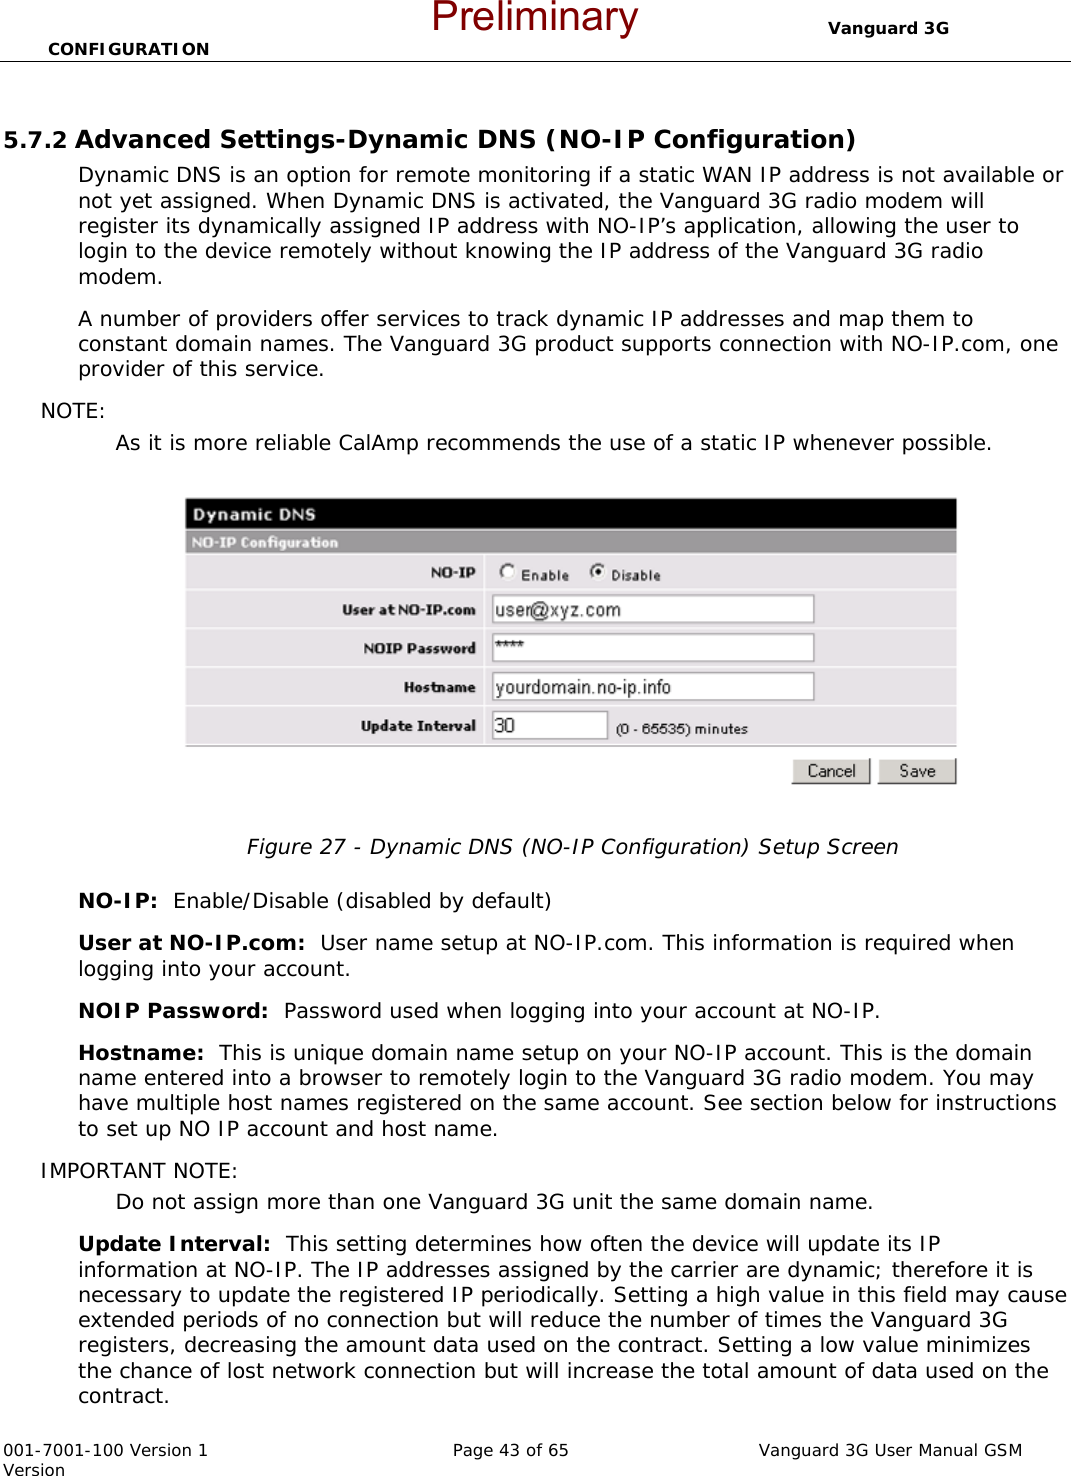                                  Vanguard 3G CONFIGURATION  001-7001-100 Version 1       Page 43 of 65       Vanguard 3G User Manual GSM Version  5.7.2 Advanced Settings-Dynamic DNS (NO-IP Configuration) Dynamic DNS is an option for remote monitoring if a static WAN IP address is not available or not yet assigned. When Dynamic DNS is activated, the Vanguard 3G radio modem will register its dynamically assigned IP address with NO-IP’s application, allowing the user to login to the device remotely without knowing the IP address of the Vanguard 3G radio modem.   A number of providers offer services to track dynamic IP addresses and map them to constant domain names. The Vanguard 3G product supports connection with NO-IP.com, one provider of this service.   NOTE:  As it is more reliable CalAmp recommends the use of a static IP whenever possible.   Figure 27 - Dynamic DNS (NO-IP Configuration) Setup Screen  NO-IP:  Enable/Disable (disabled by default)   User at NO-IP.com:  User name setup at NO-IP.com. This information is required when logging into your account. NOIP Password:  Password used when logging into your account at NO-IP.   Hostname:  This is unique domain name setup on your NO-IP account. This is the domain name entered into a browser to remotely login to the Vanguard 3G radio modem. You may have multiple host names registered on the same account. See section below for instructions to set up NO IP account and host name.   IMPORTANT NOTE:  Do not assign more than one Vanguard 3G unit the same domain name. Update Interval:  This setting determines how often the device will update its IP information at NO-IP. The IP addresses assigned by the carrier are dynamic; therefore it is necessary to update the registered IP periodically. Setting a high value in this field may cause extended periods of no connection but will reduce the number of times the Vanguard 3G registers, decreasing the amount data used on the contract. Setting a low value minimizes the chance of lost network connection but will increase the total amount of data used on the contract.   Preliminary